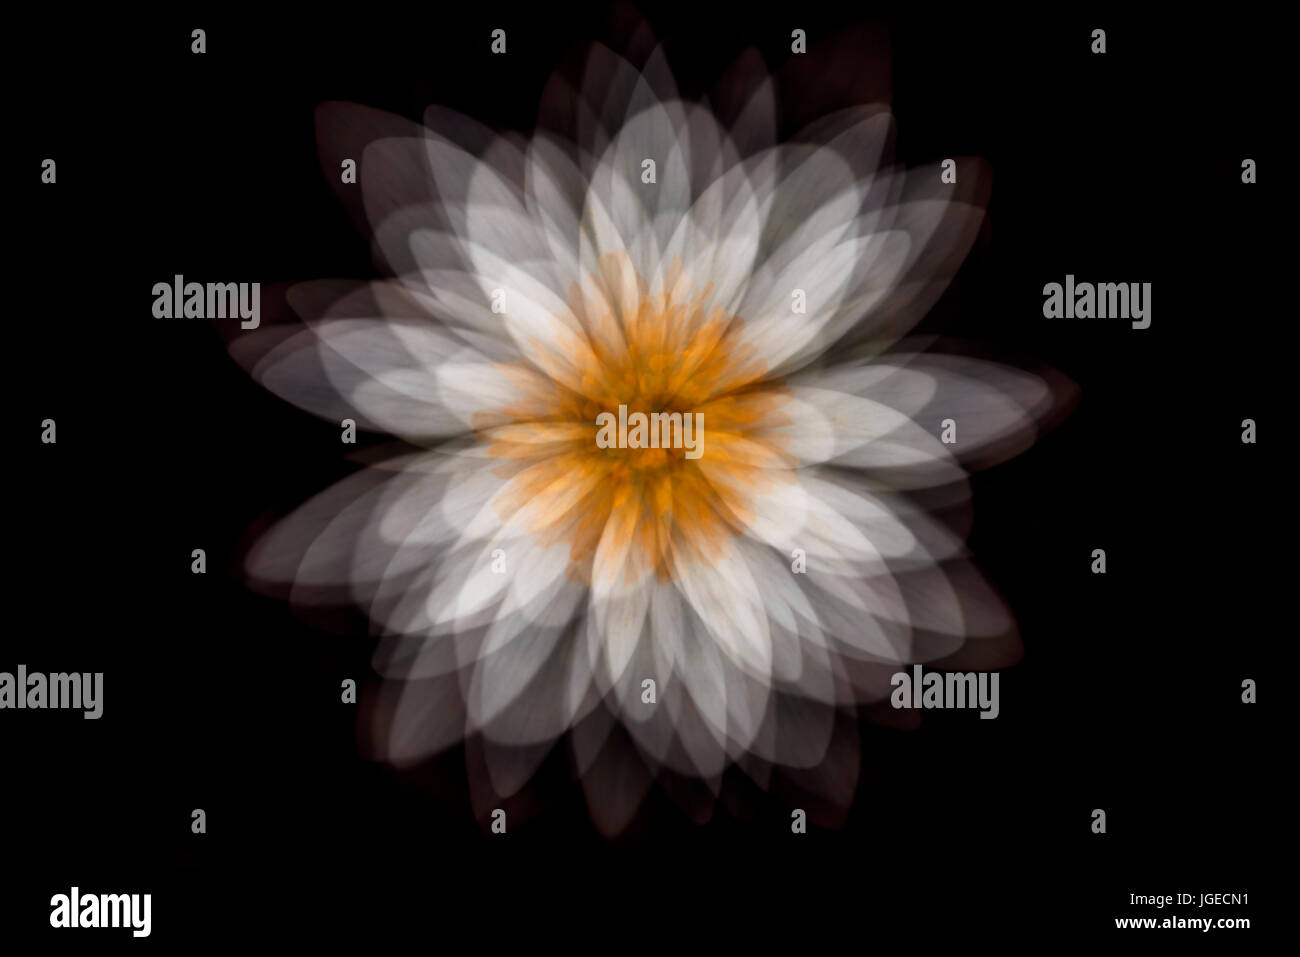 Bloodroot abstract using multiple exposures to create an artistic floral portrait Stock Photo